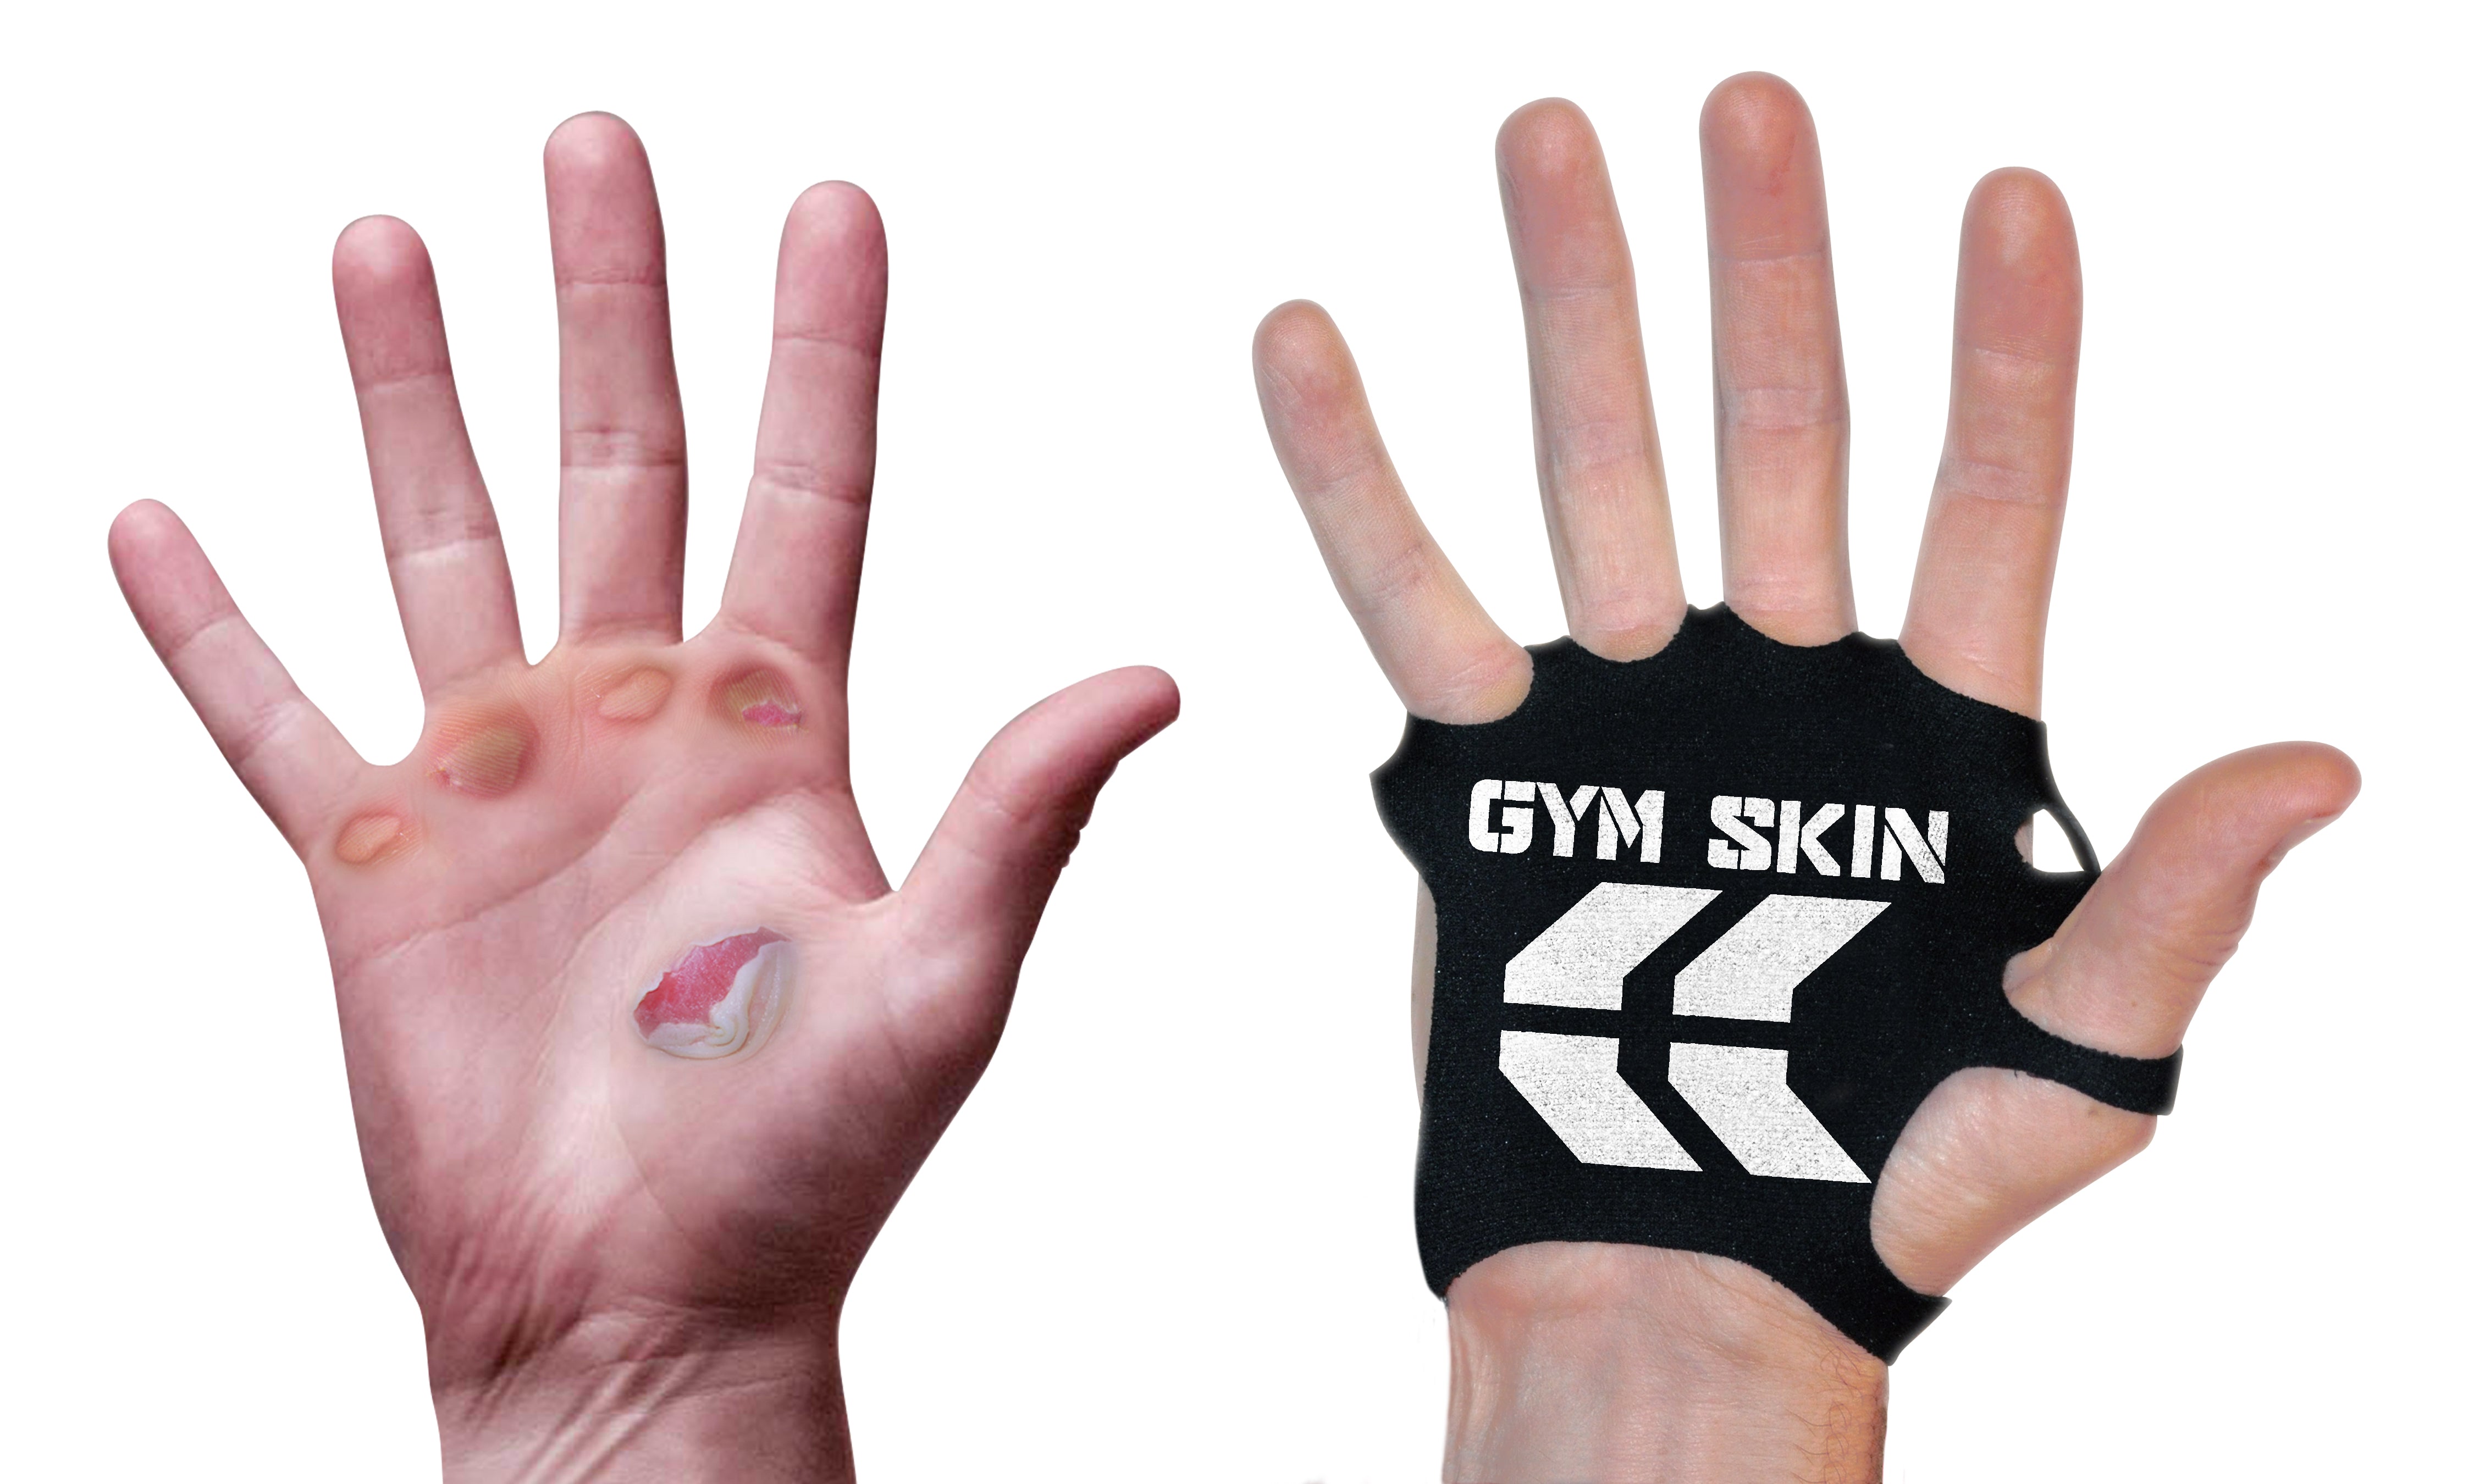 How to Prevent and Manage Weightlifting Calluses